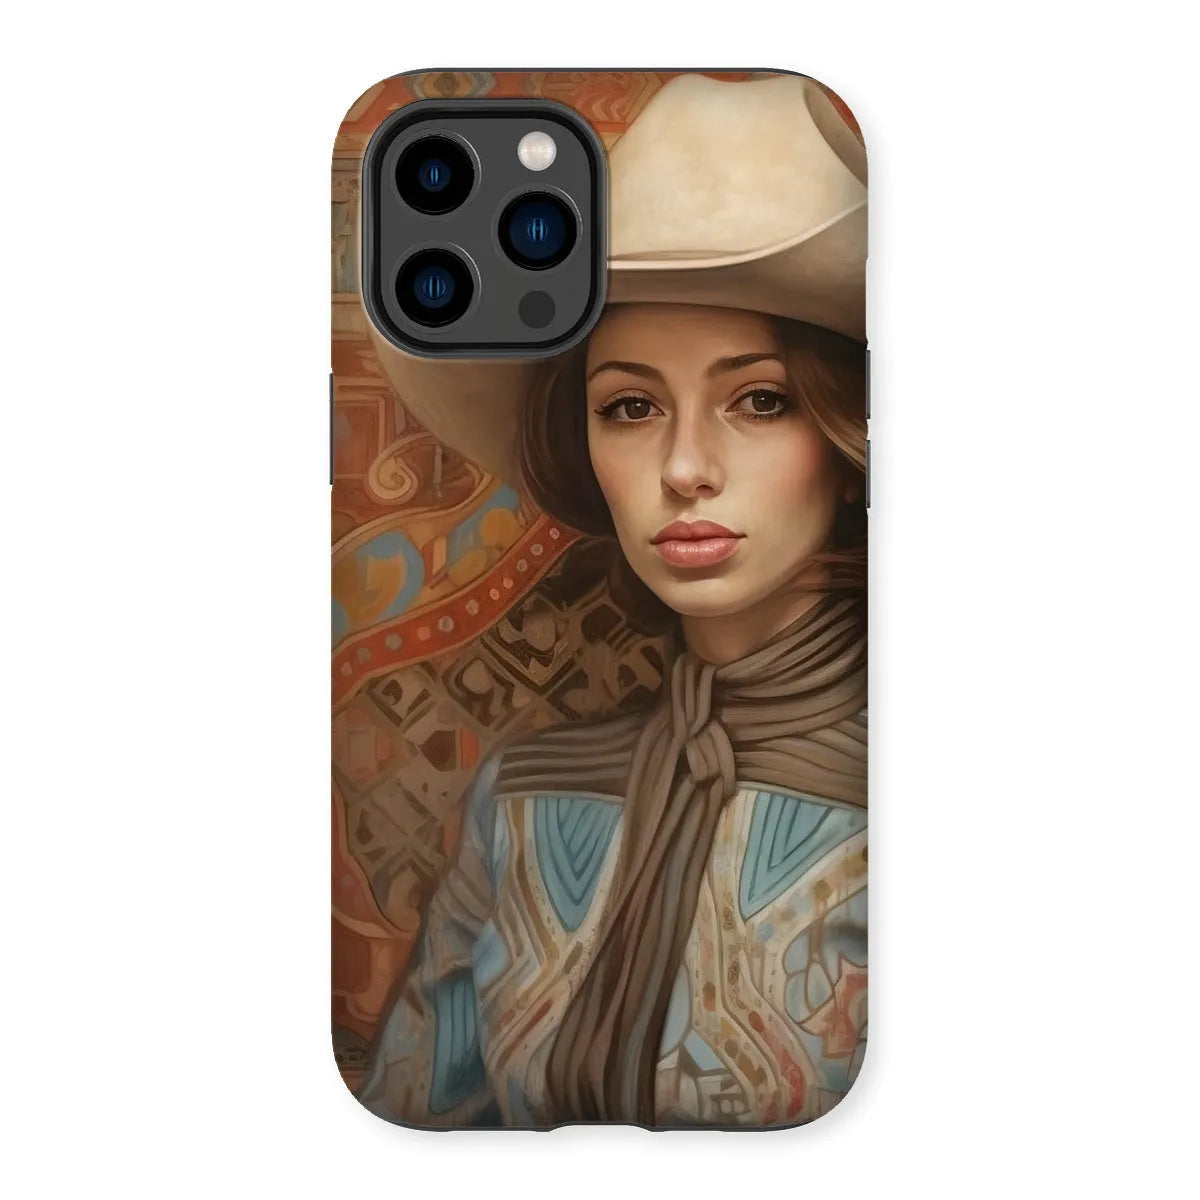 Anahita The Lesbian Cowgirl - Sapphic Art Phone Case - Iphone 14 Pro Max / Matte - Mobile Phone Cases - Aesthetic Art